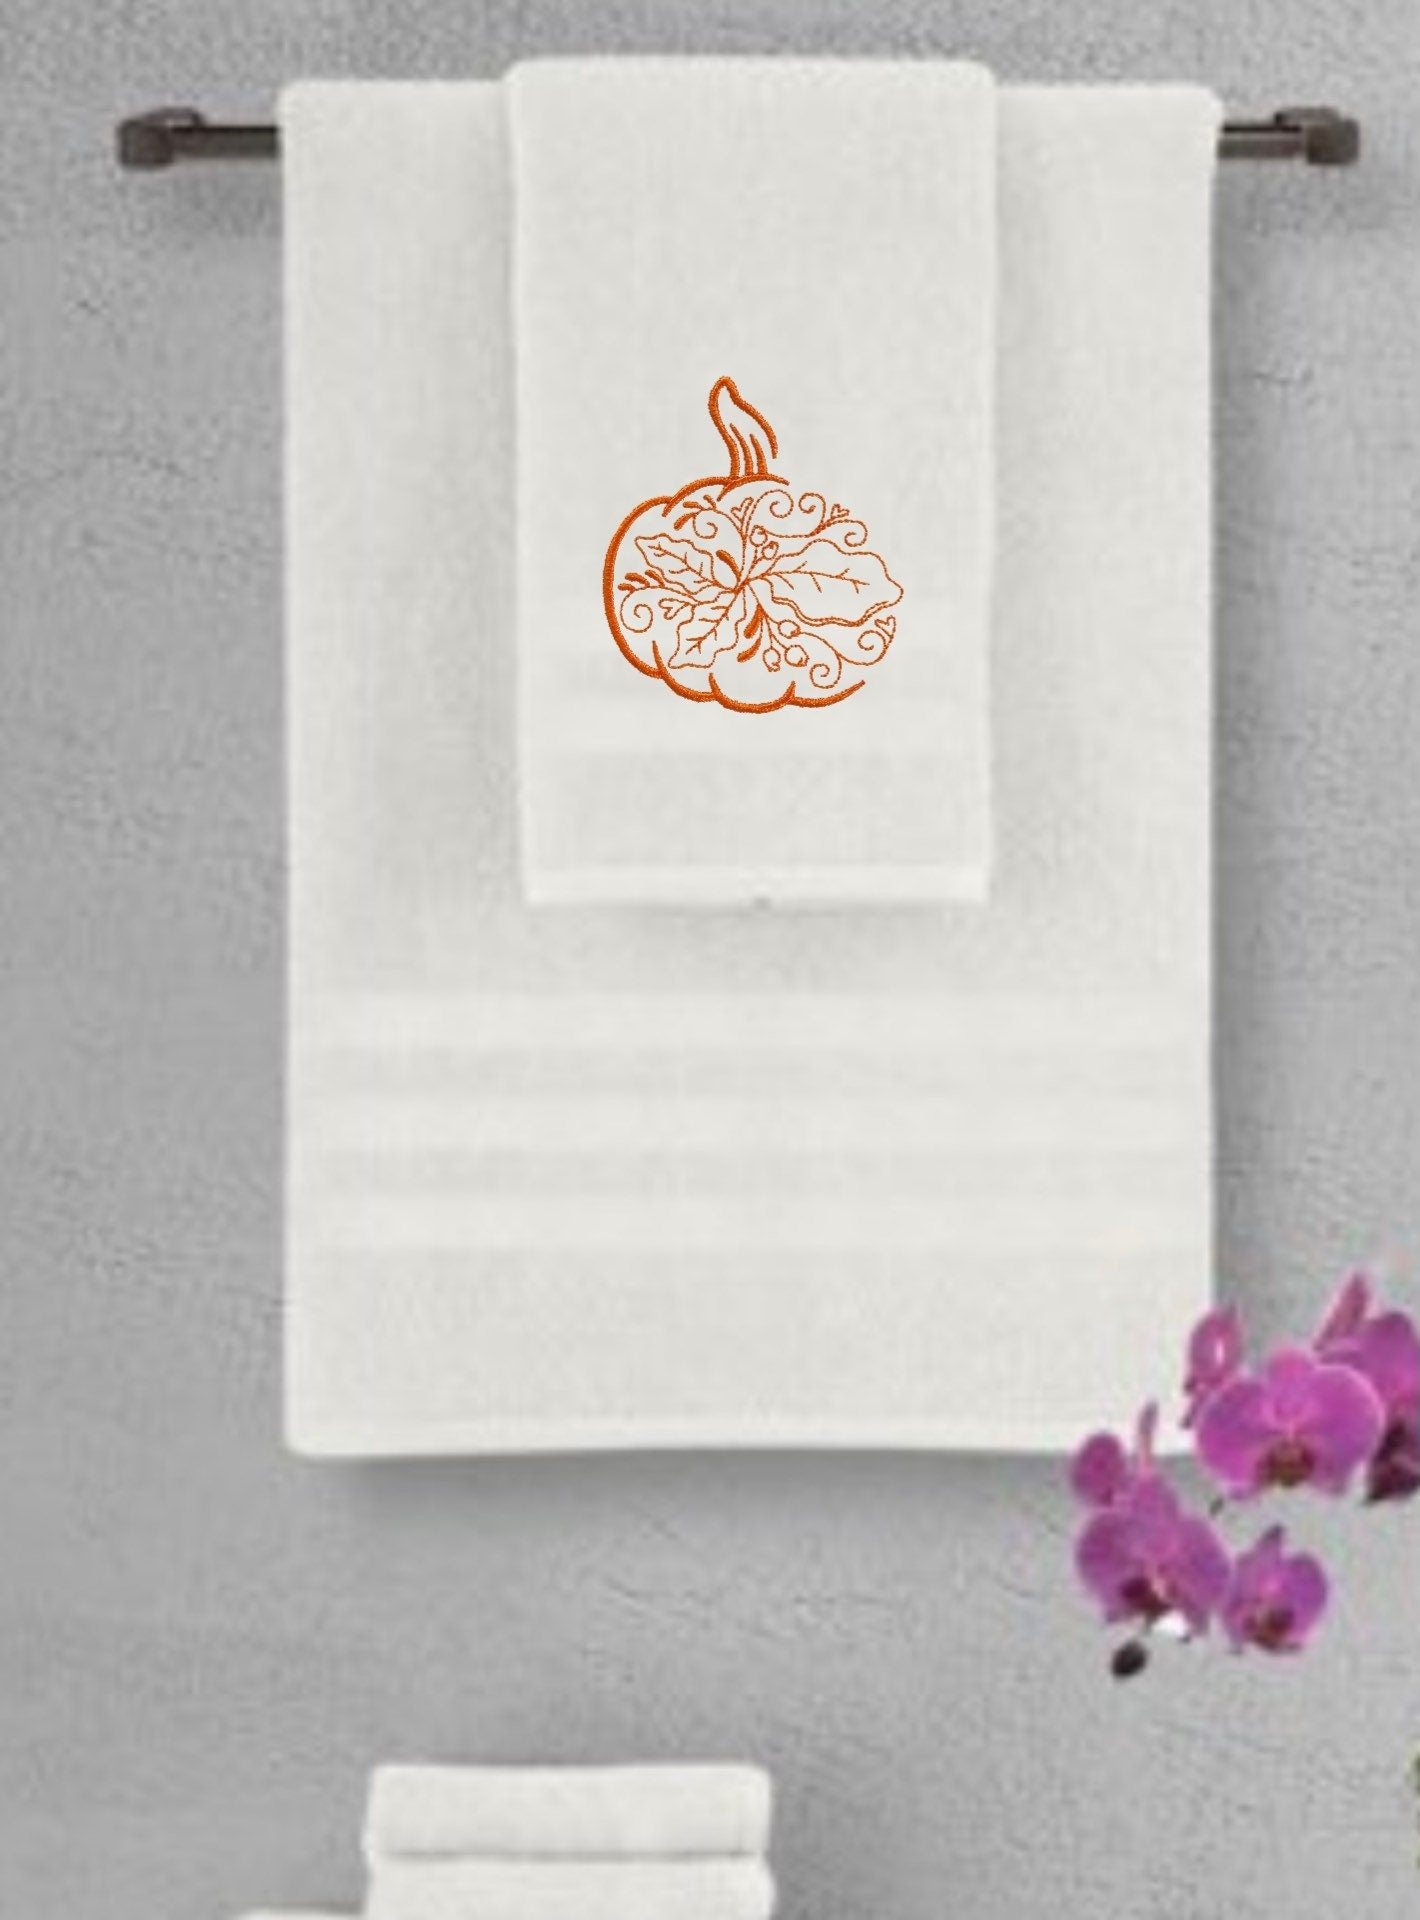 Decorative Autumn Pumpkin and Fall Leaves Embroidered Bath Towels. 100% Cotton Hand or Fingertip Towel